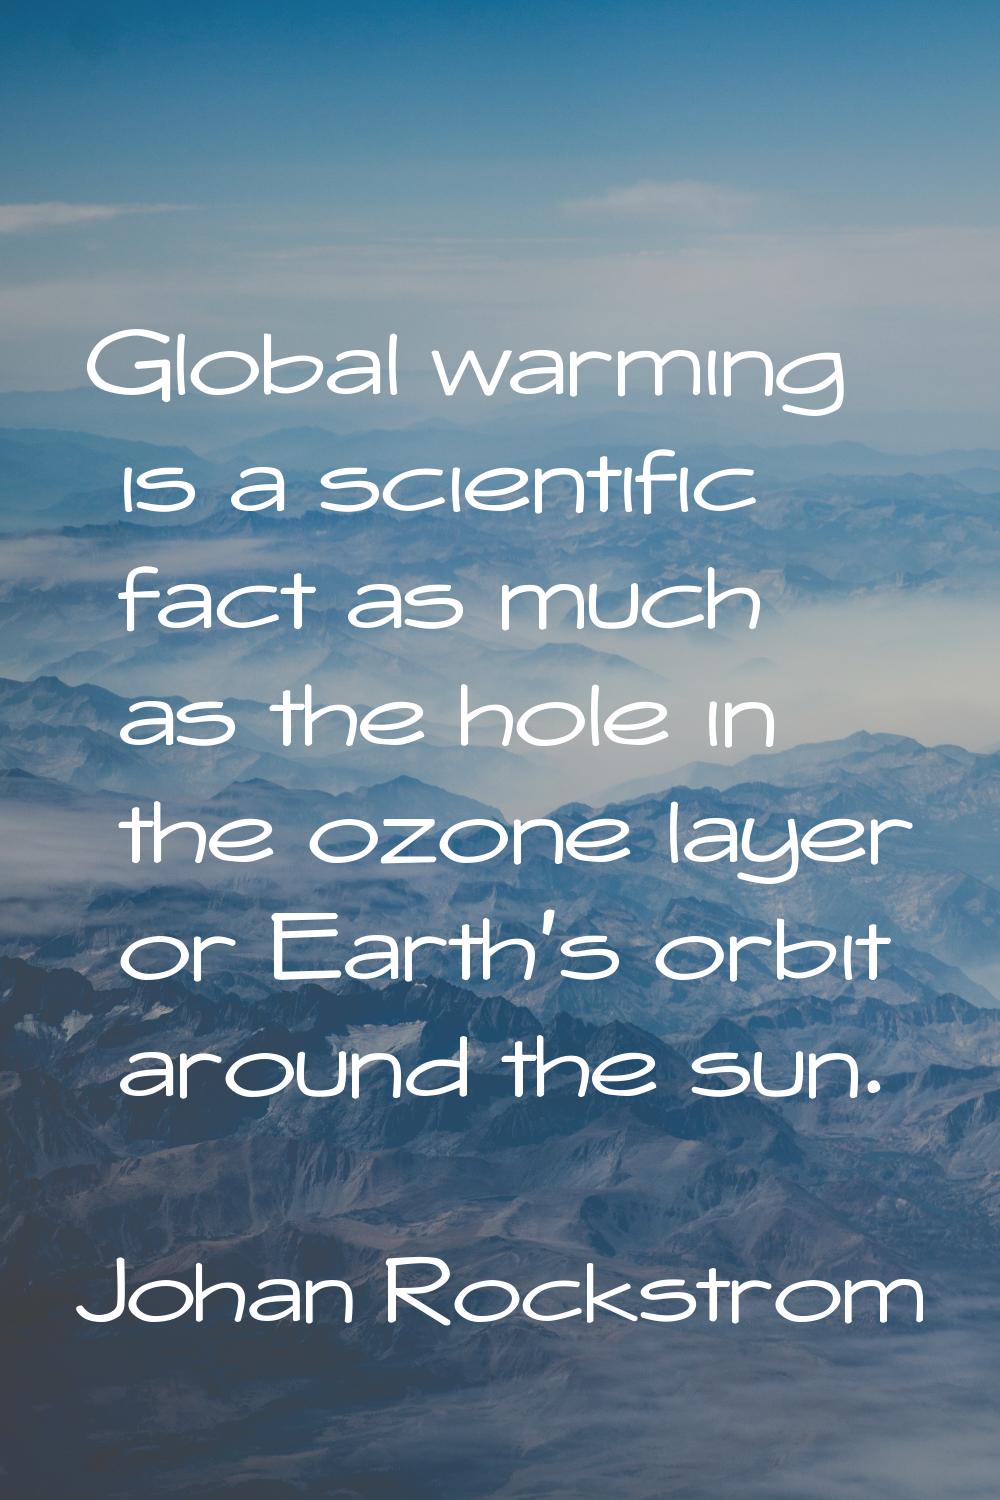 Global warming is a scientific fact as much as the hole in the ozone layer or Earth's orbit around 